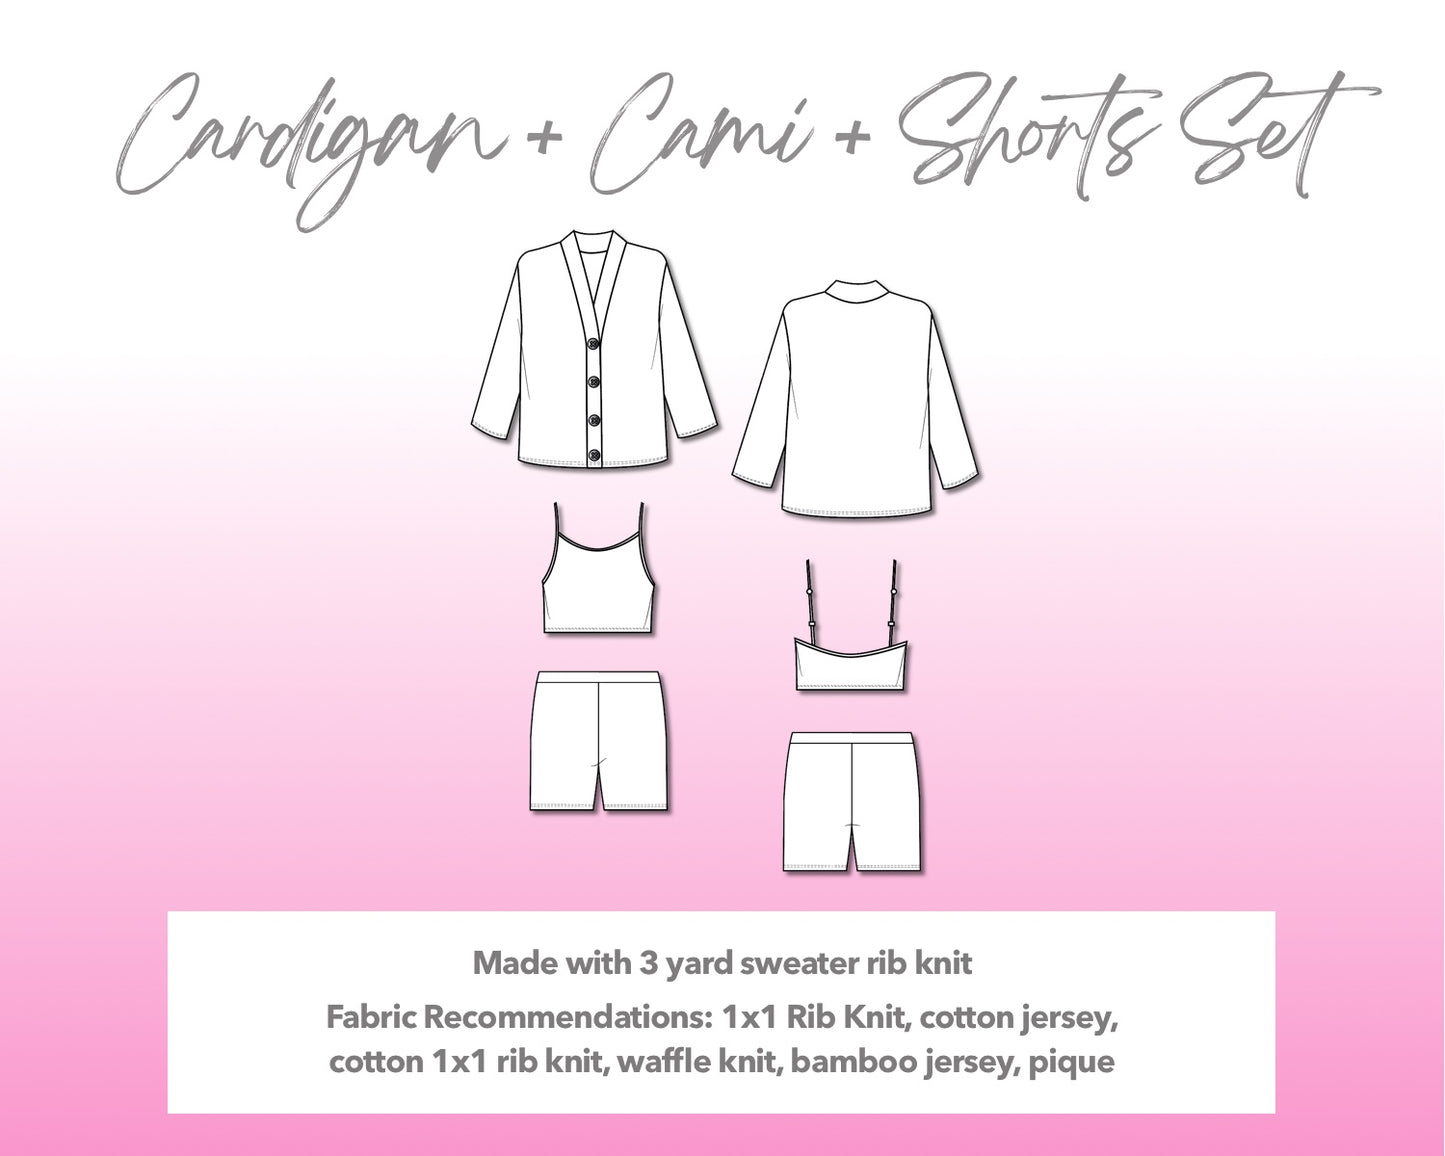 Illustration and detailed description for Cardigan Crop Top and Shorts Set sewing pattern.